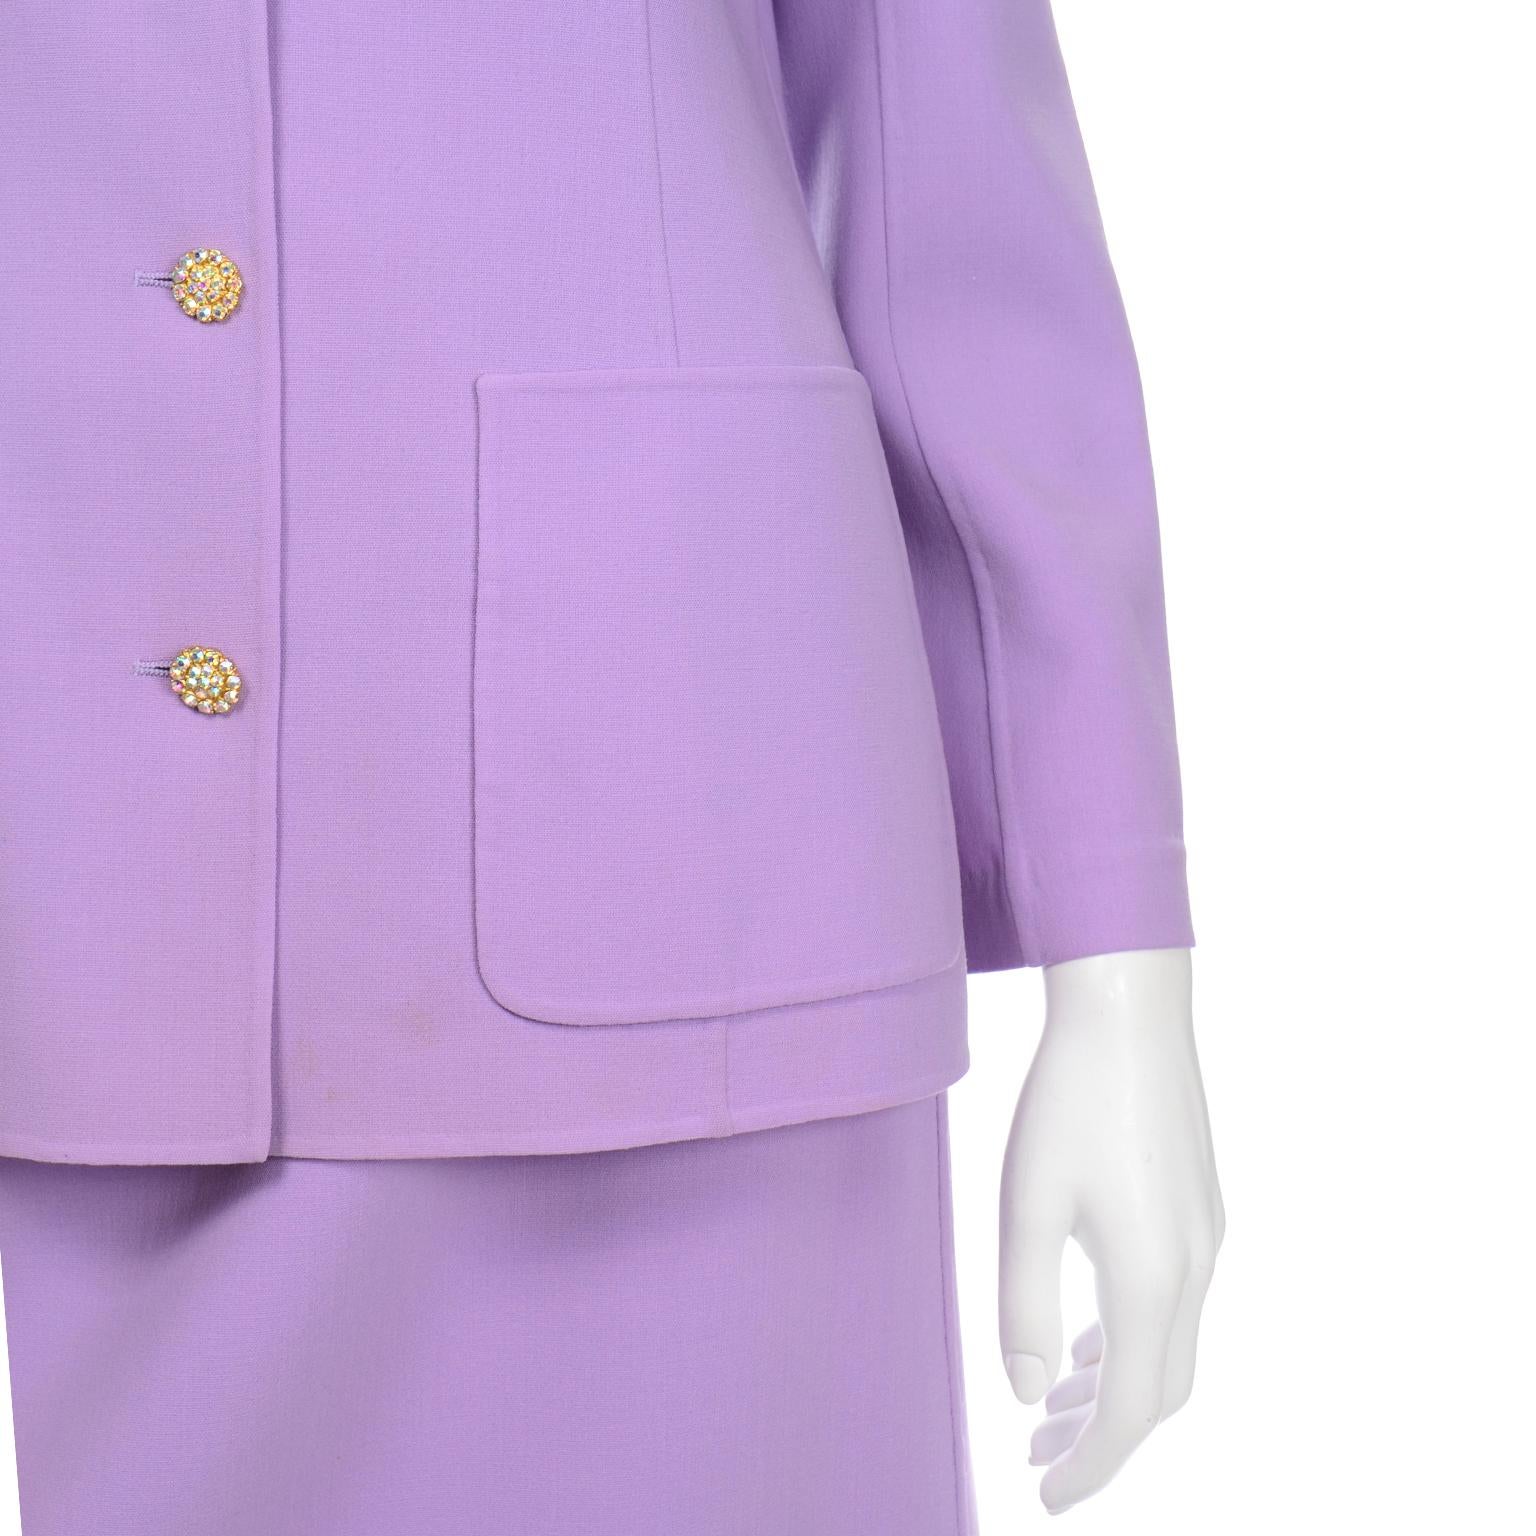 Monochromatic Celine Monochromatic Minimalist Lavender Skirt Jacket Suit  In Excellent Condition For Sale In Portland, OR